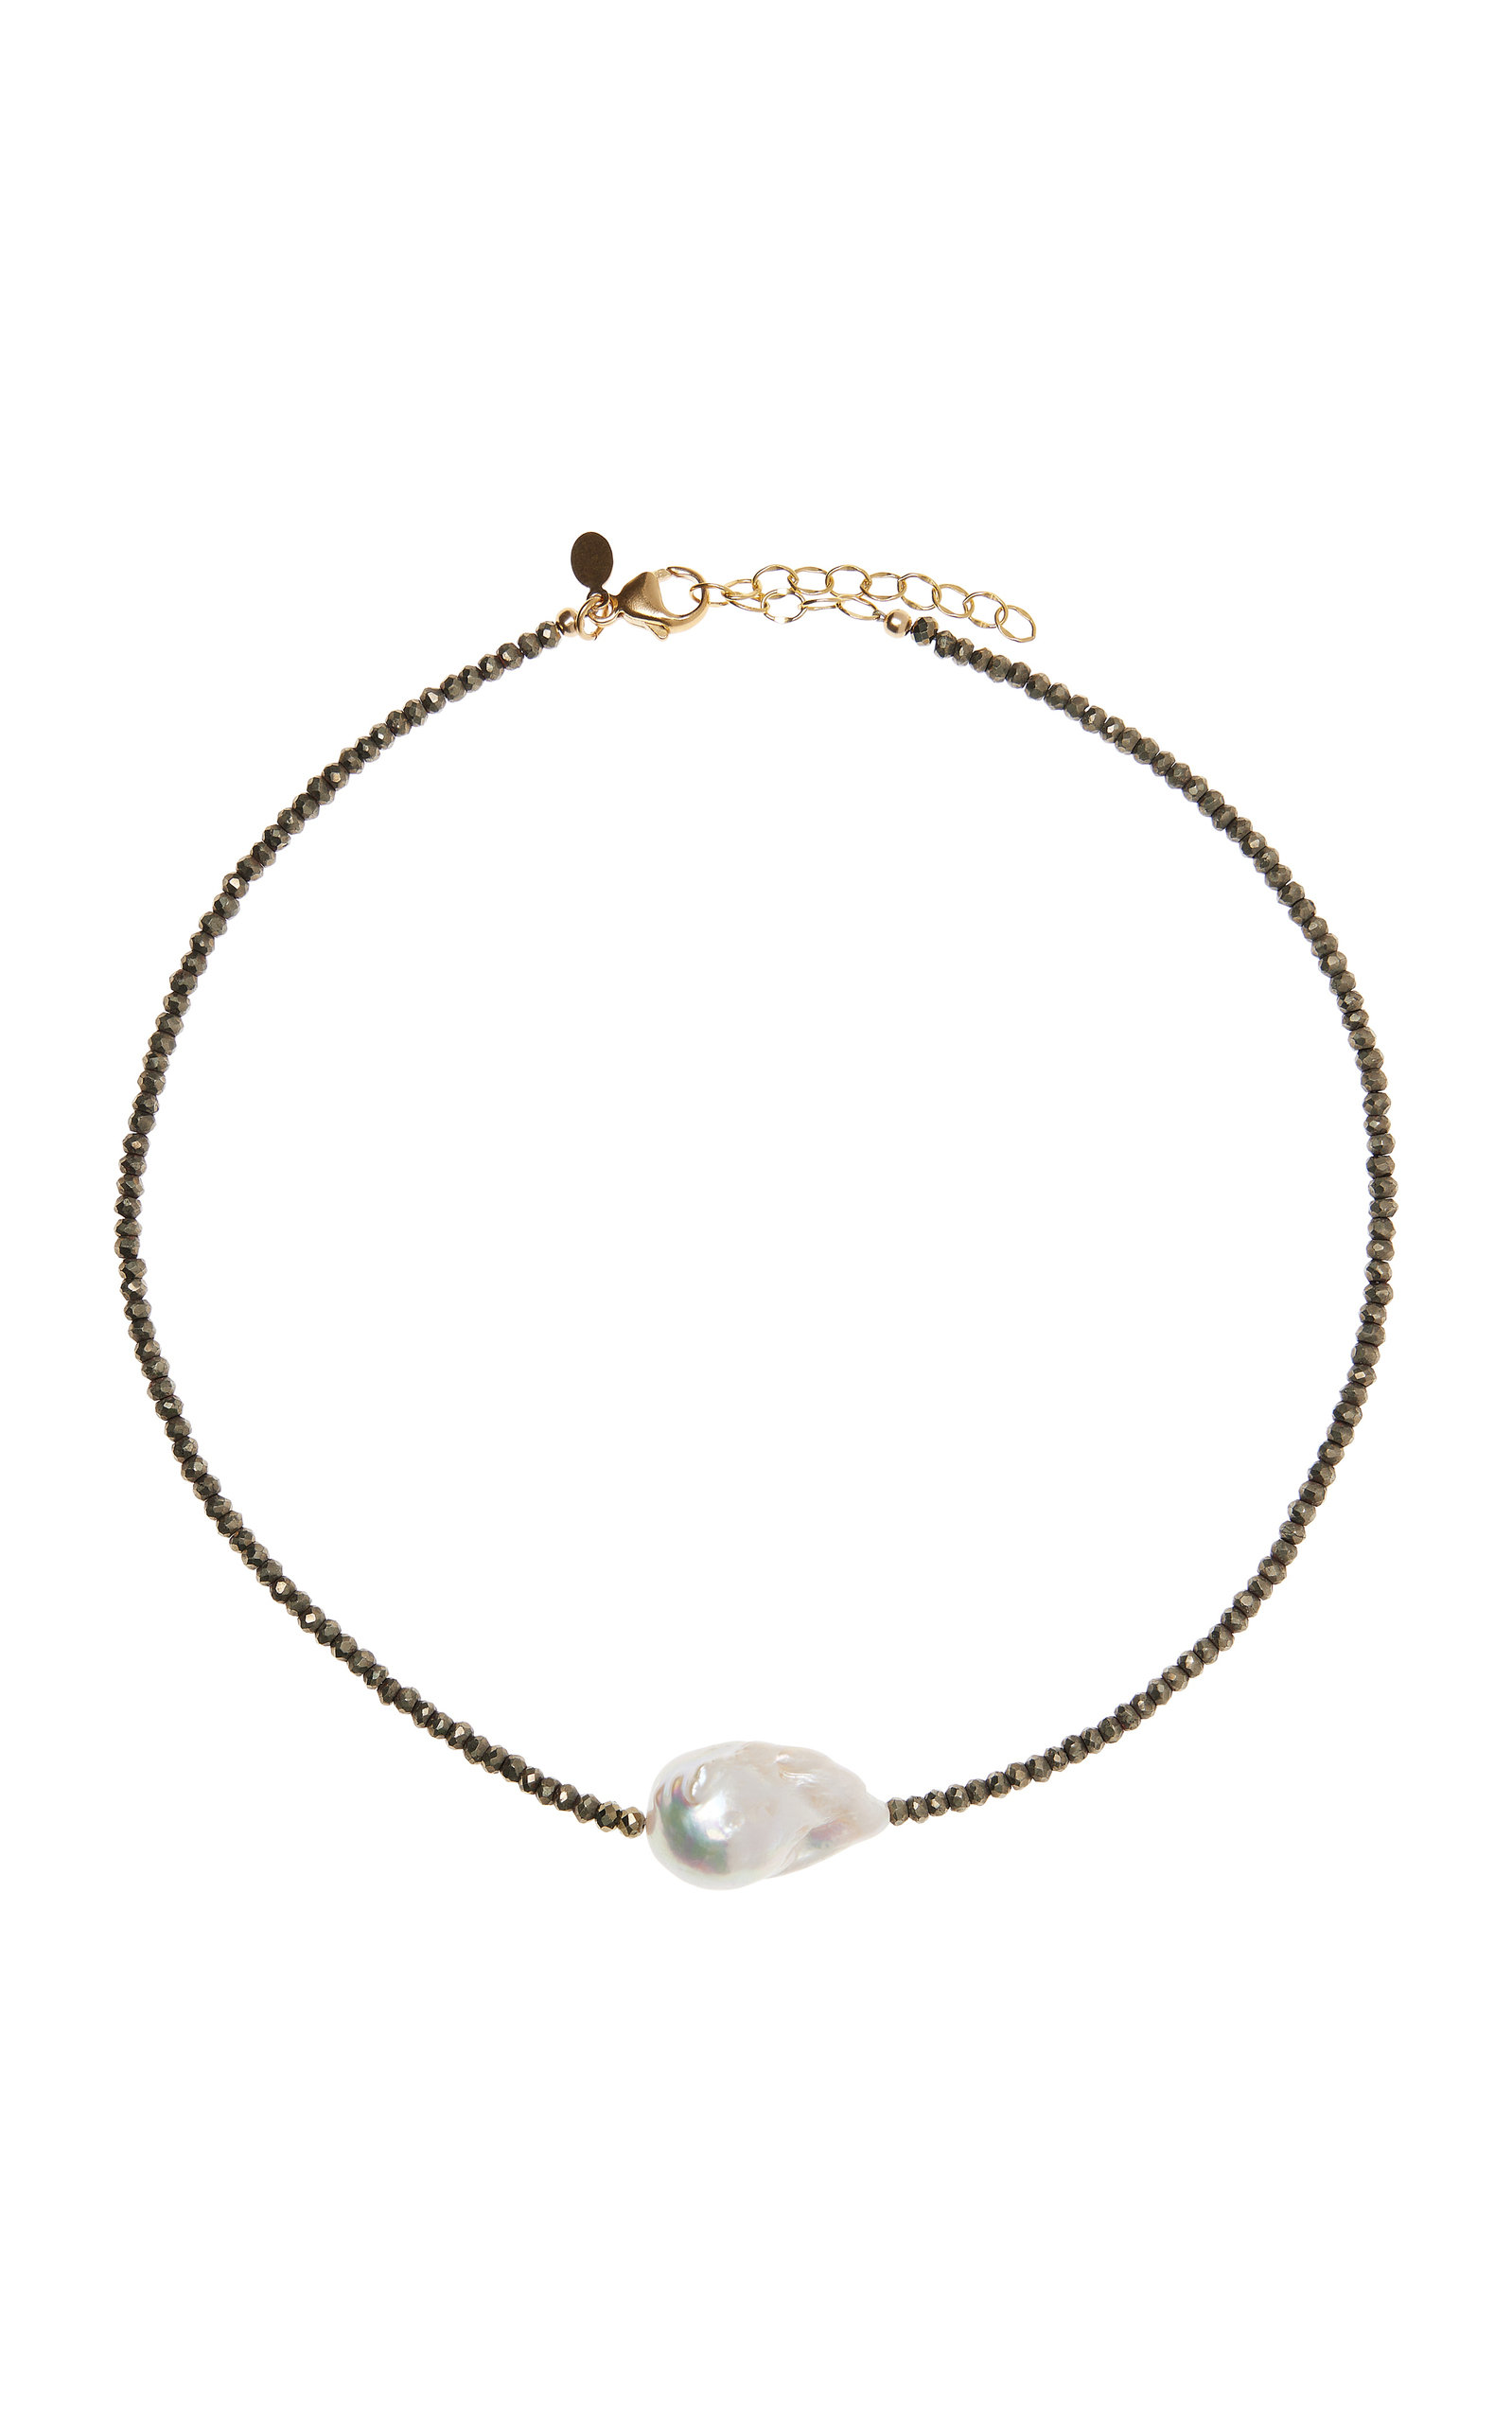 Joie DiGiovanni Women's Pearl; Pyrite Gold-Filled Necklace